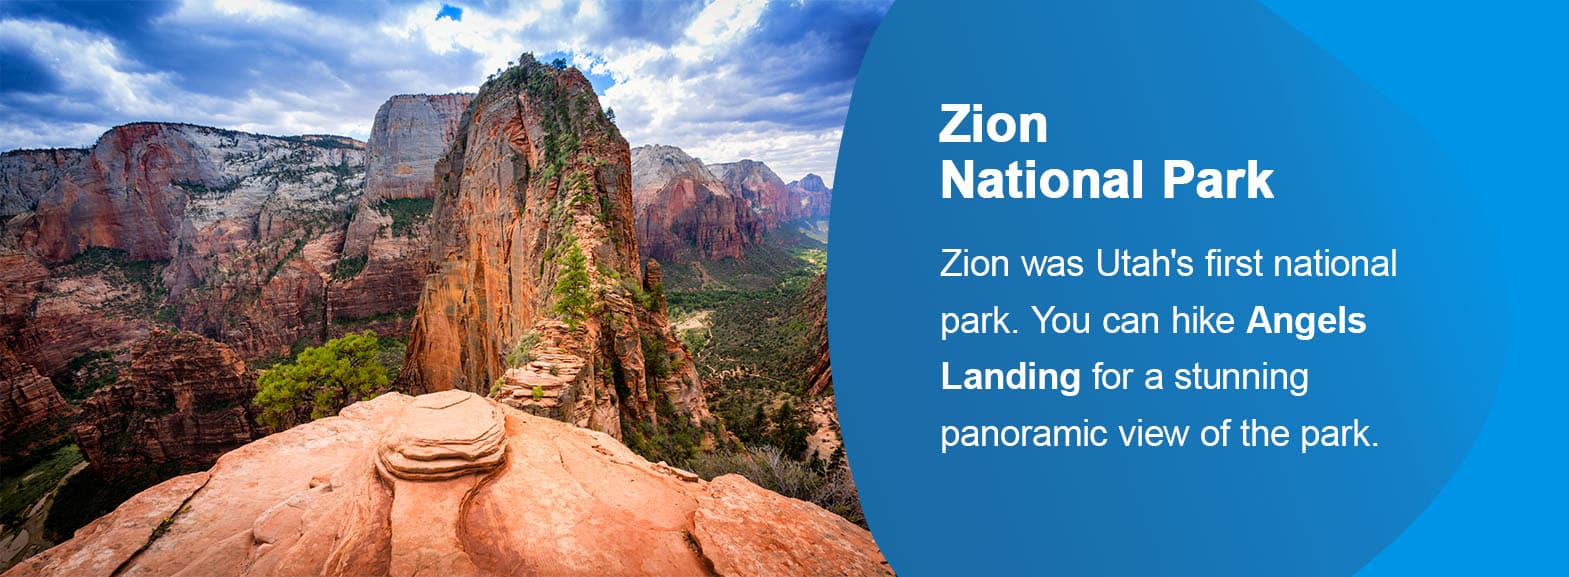 Zion National Park. Zion was Utah's first national park. You can hike Angels Landing for a stunning panoramic view of the park.